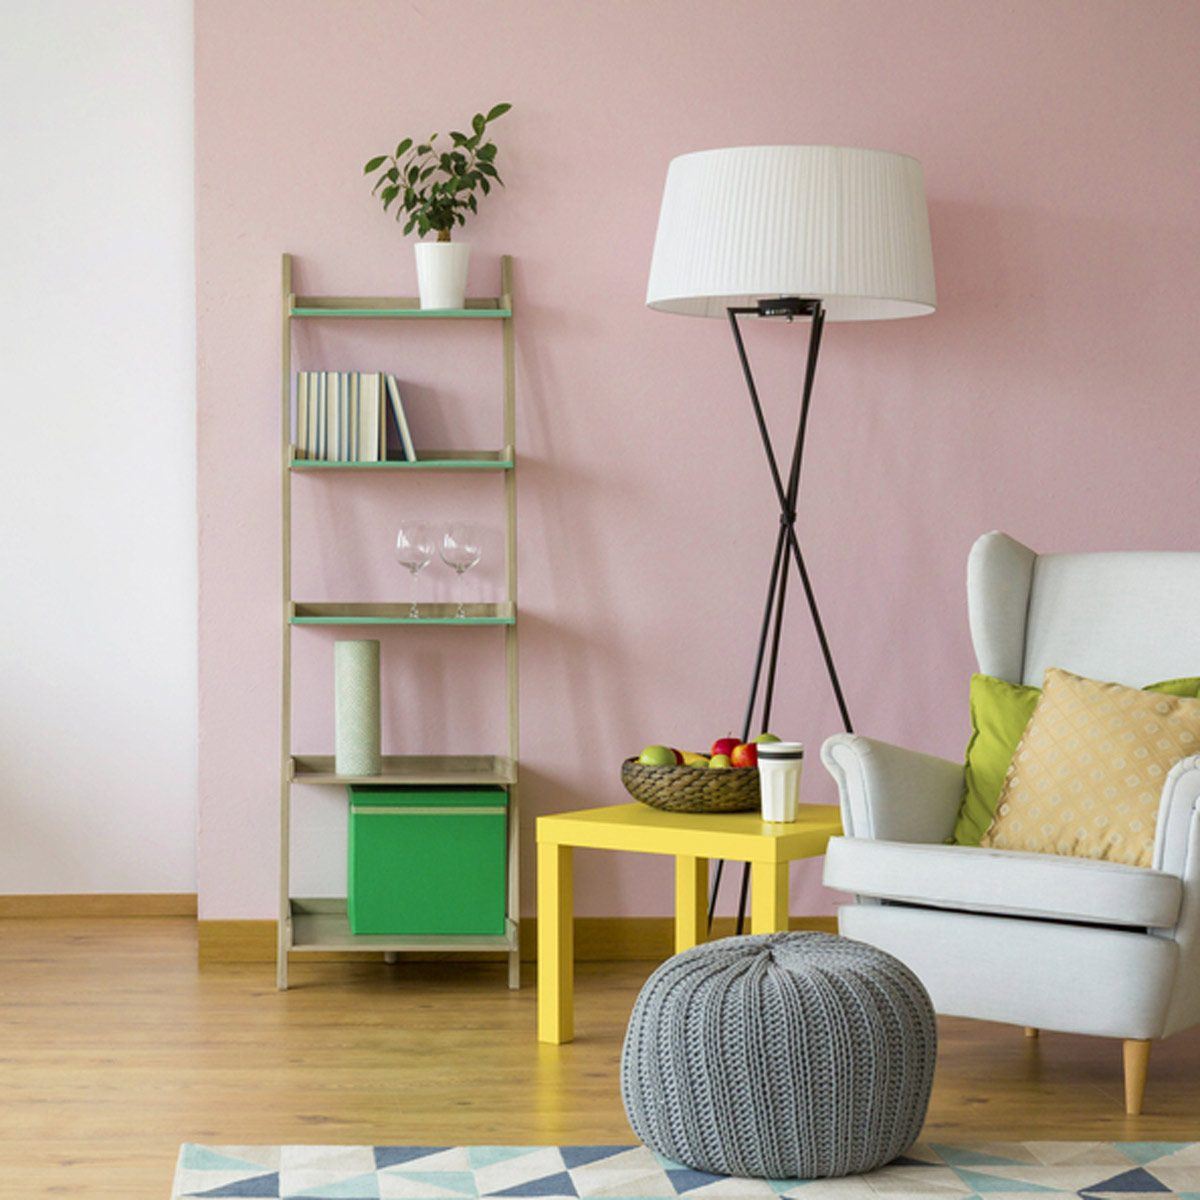 Painting A Living Room
 13 Great Paint Ideas for Your Living Room — The Family